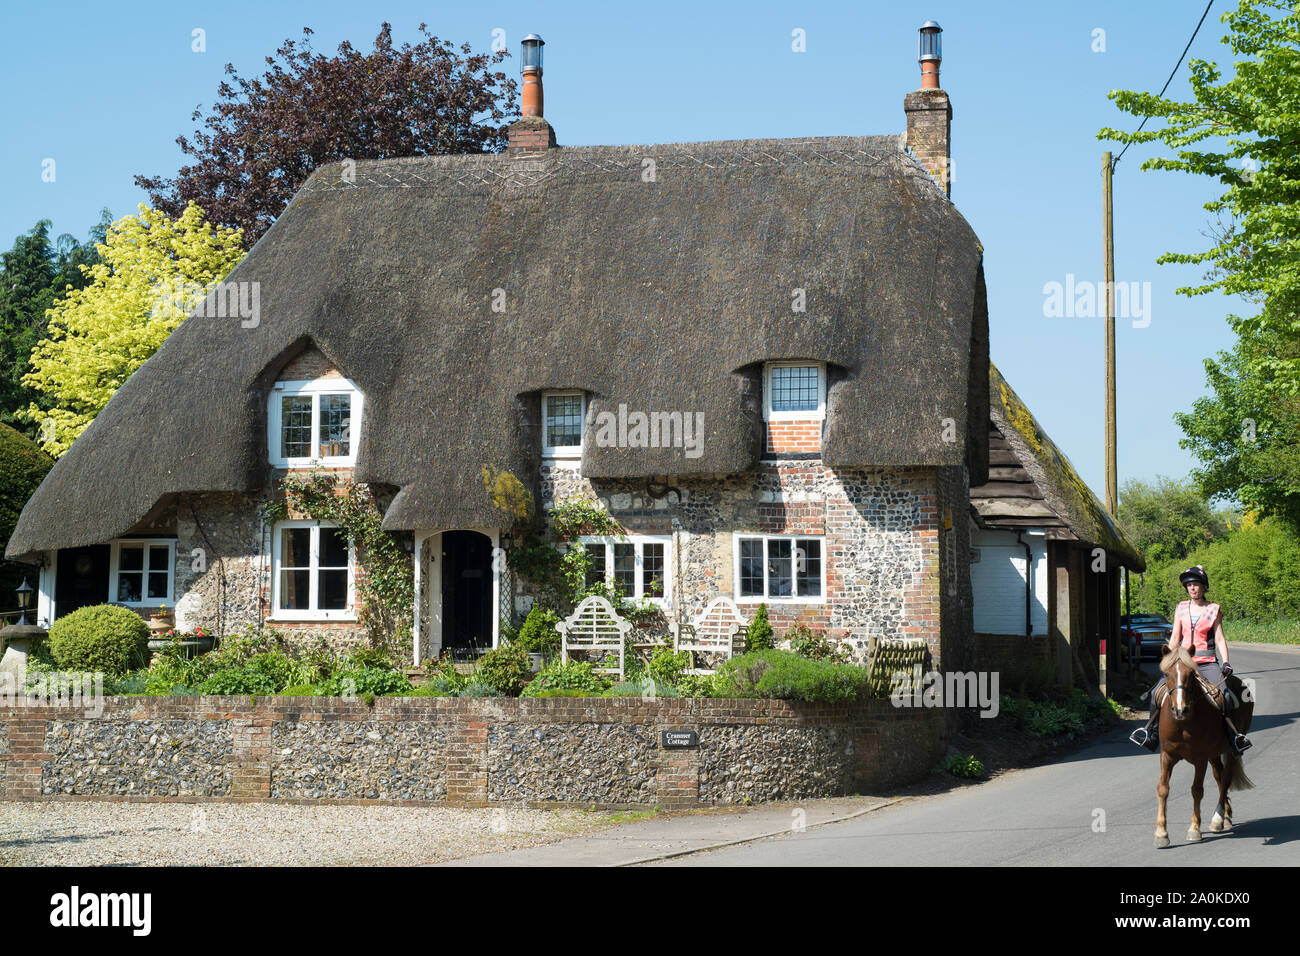 Horse rider passes typical English thatched cottage of brick and flint construction in Ramsbury, Wiltshire, UK Stock Photo